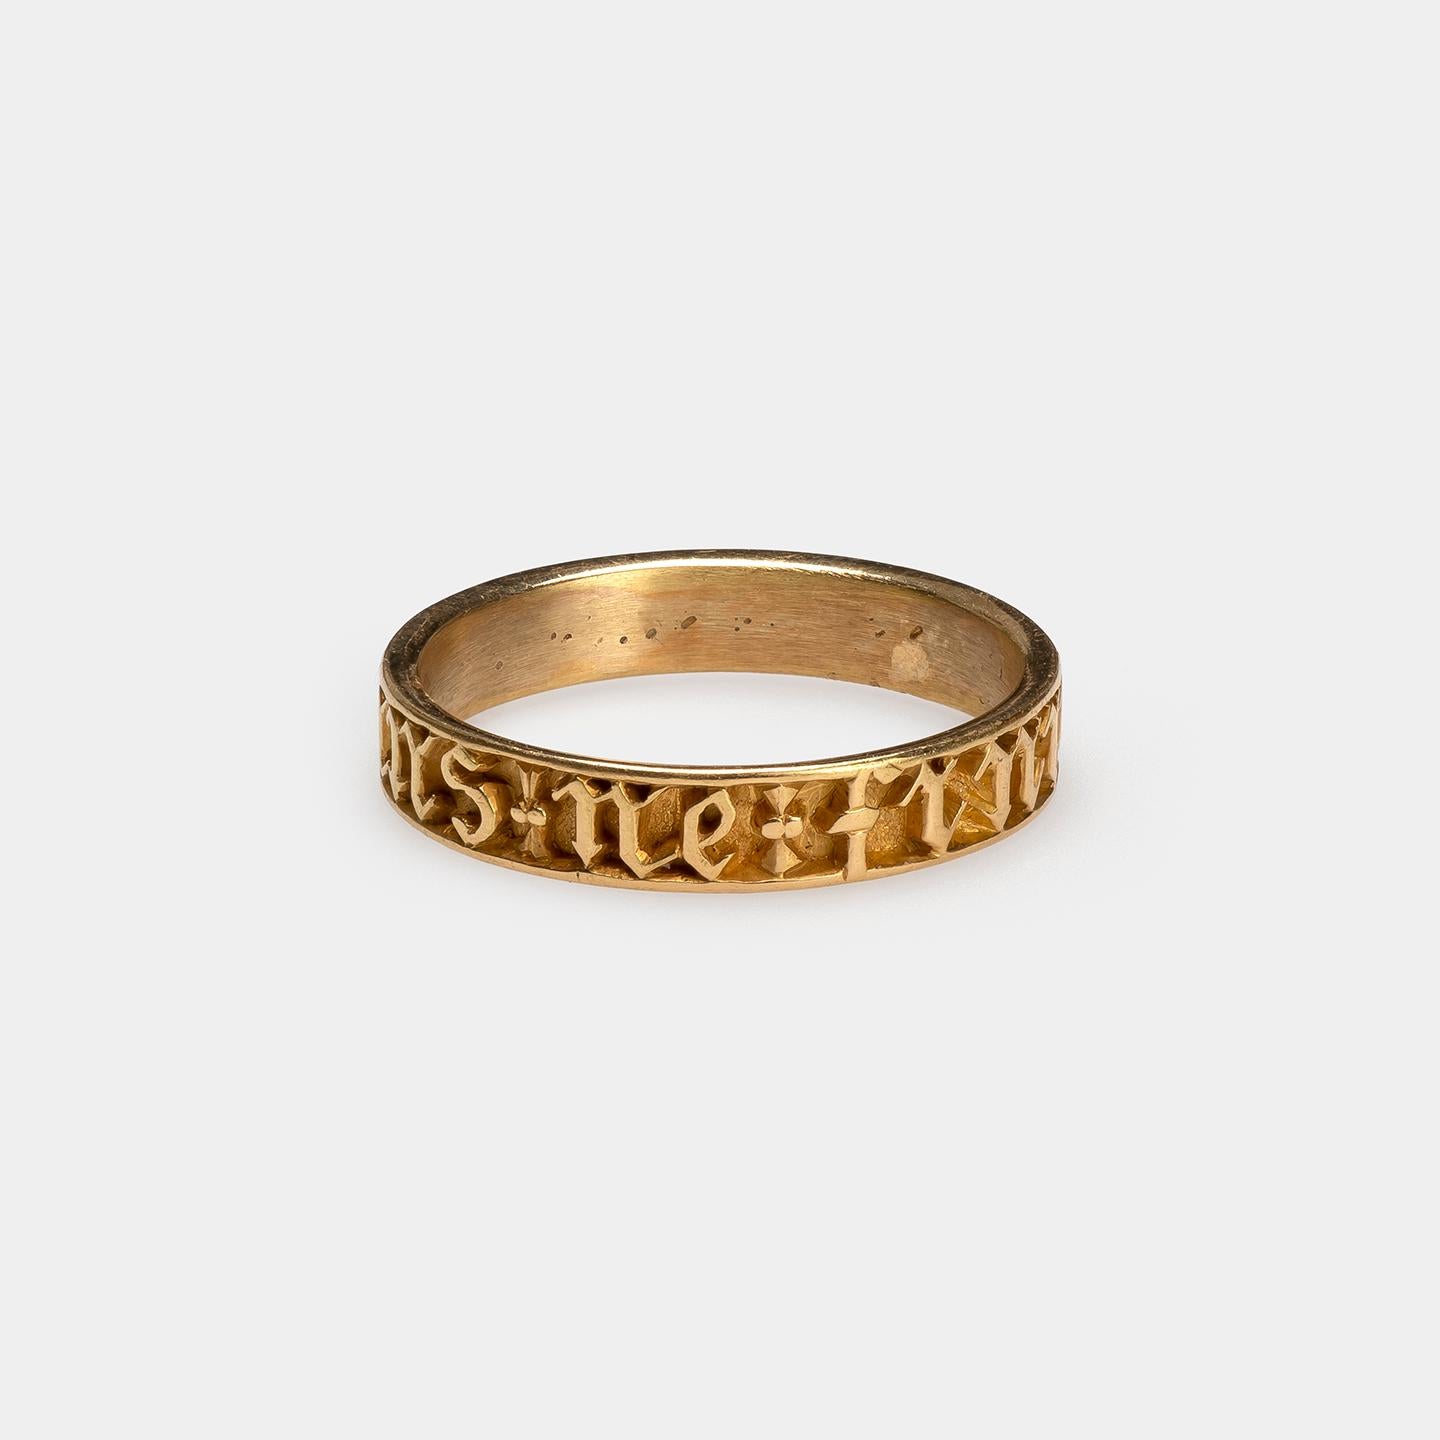 Gothic Revival Antique Neo-Gothic Gold Band Ring with inscription For Sale